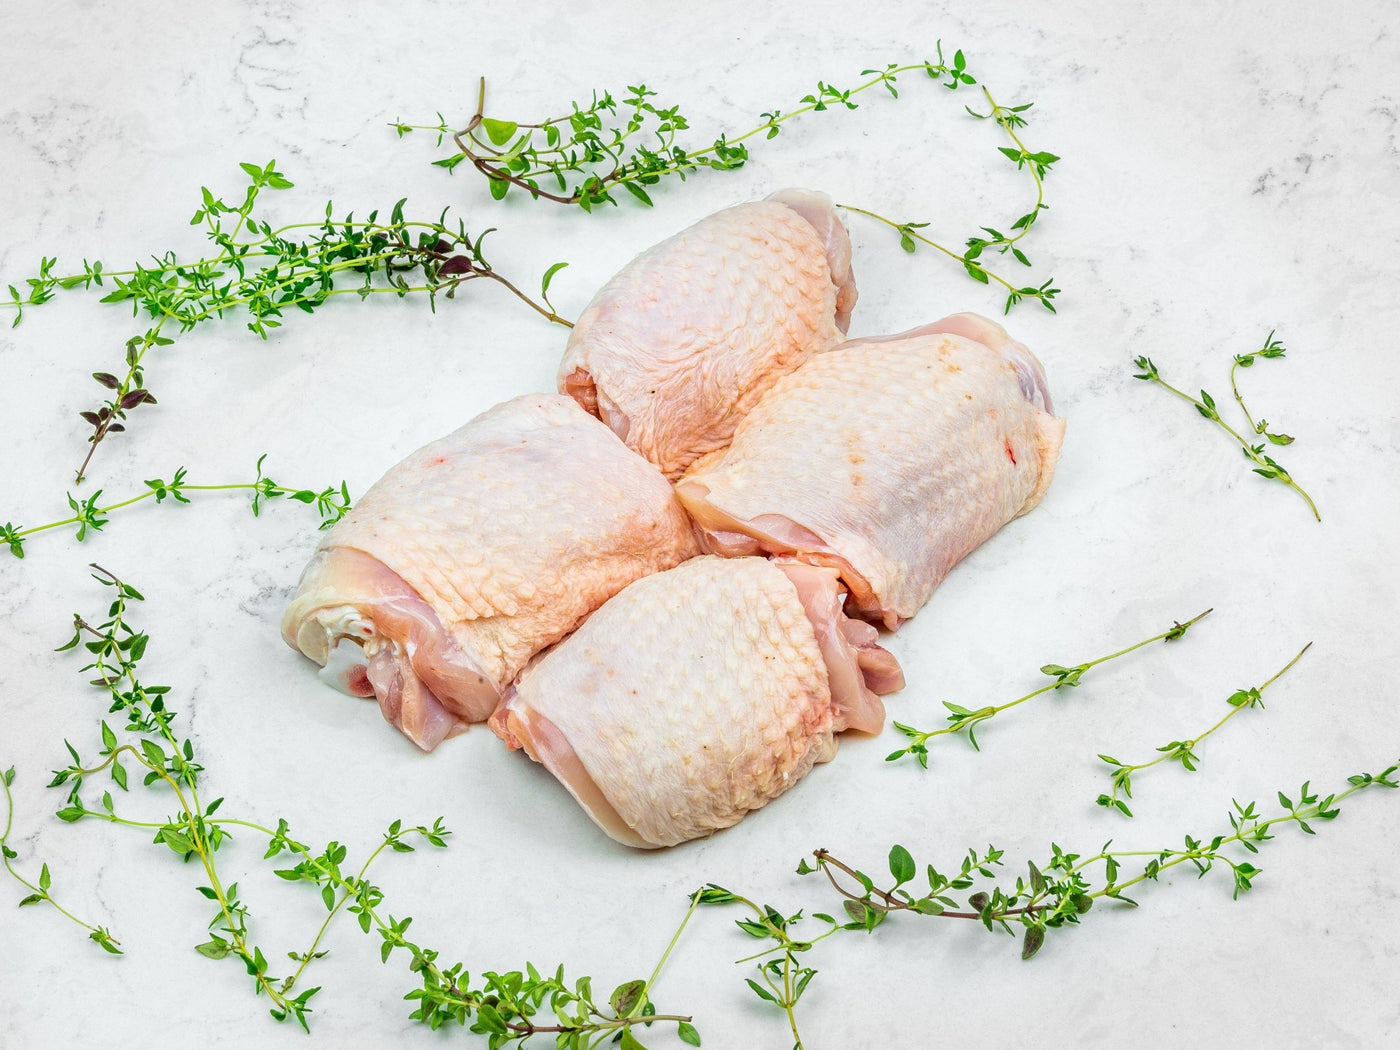 Free Range Herb Fed Chicken Thighs - Chicken - Thomas Joseph Butchery - Ethical Dry-Aged Meat The Best Steak UK Thomas Joseph Butchery